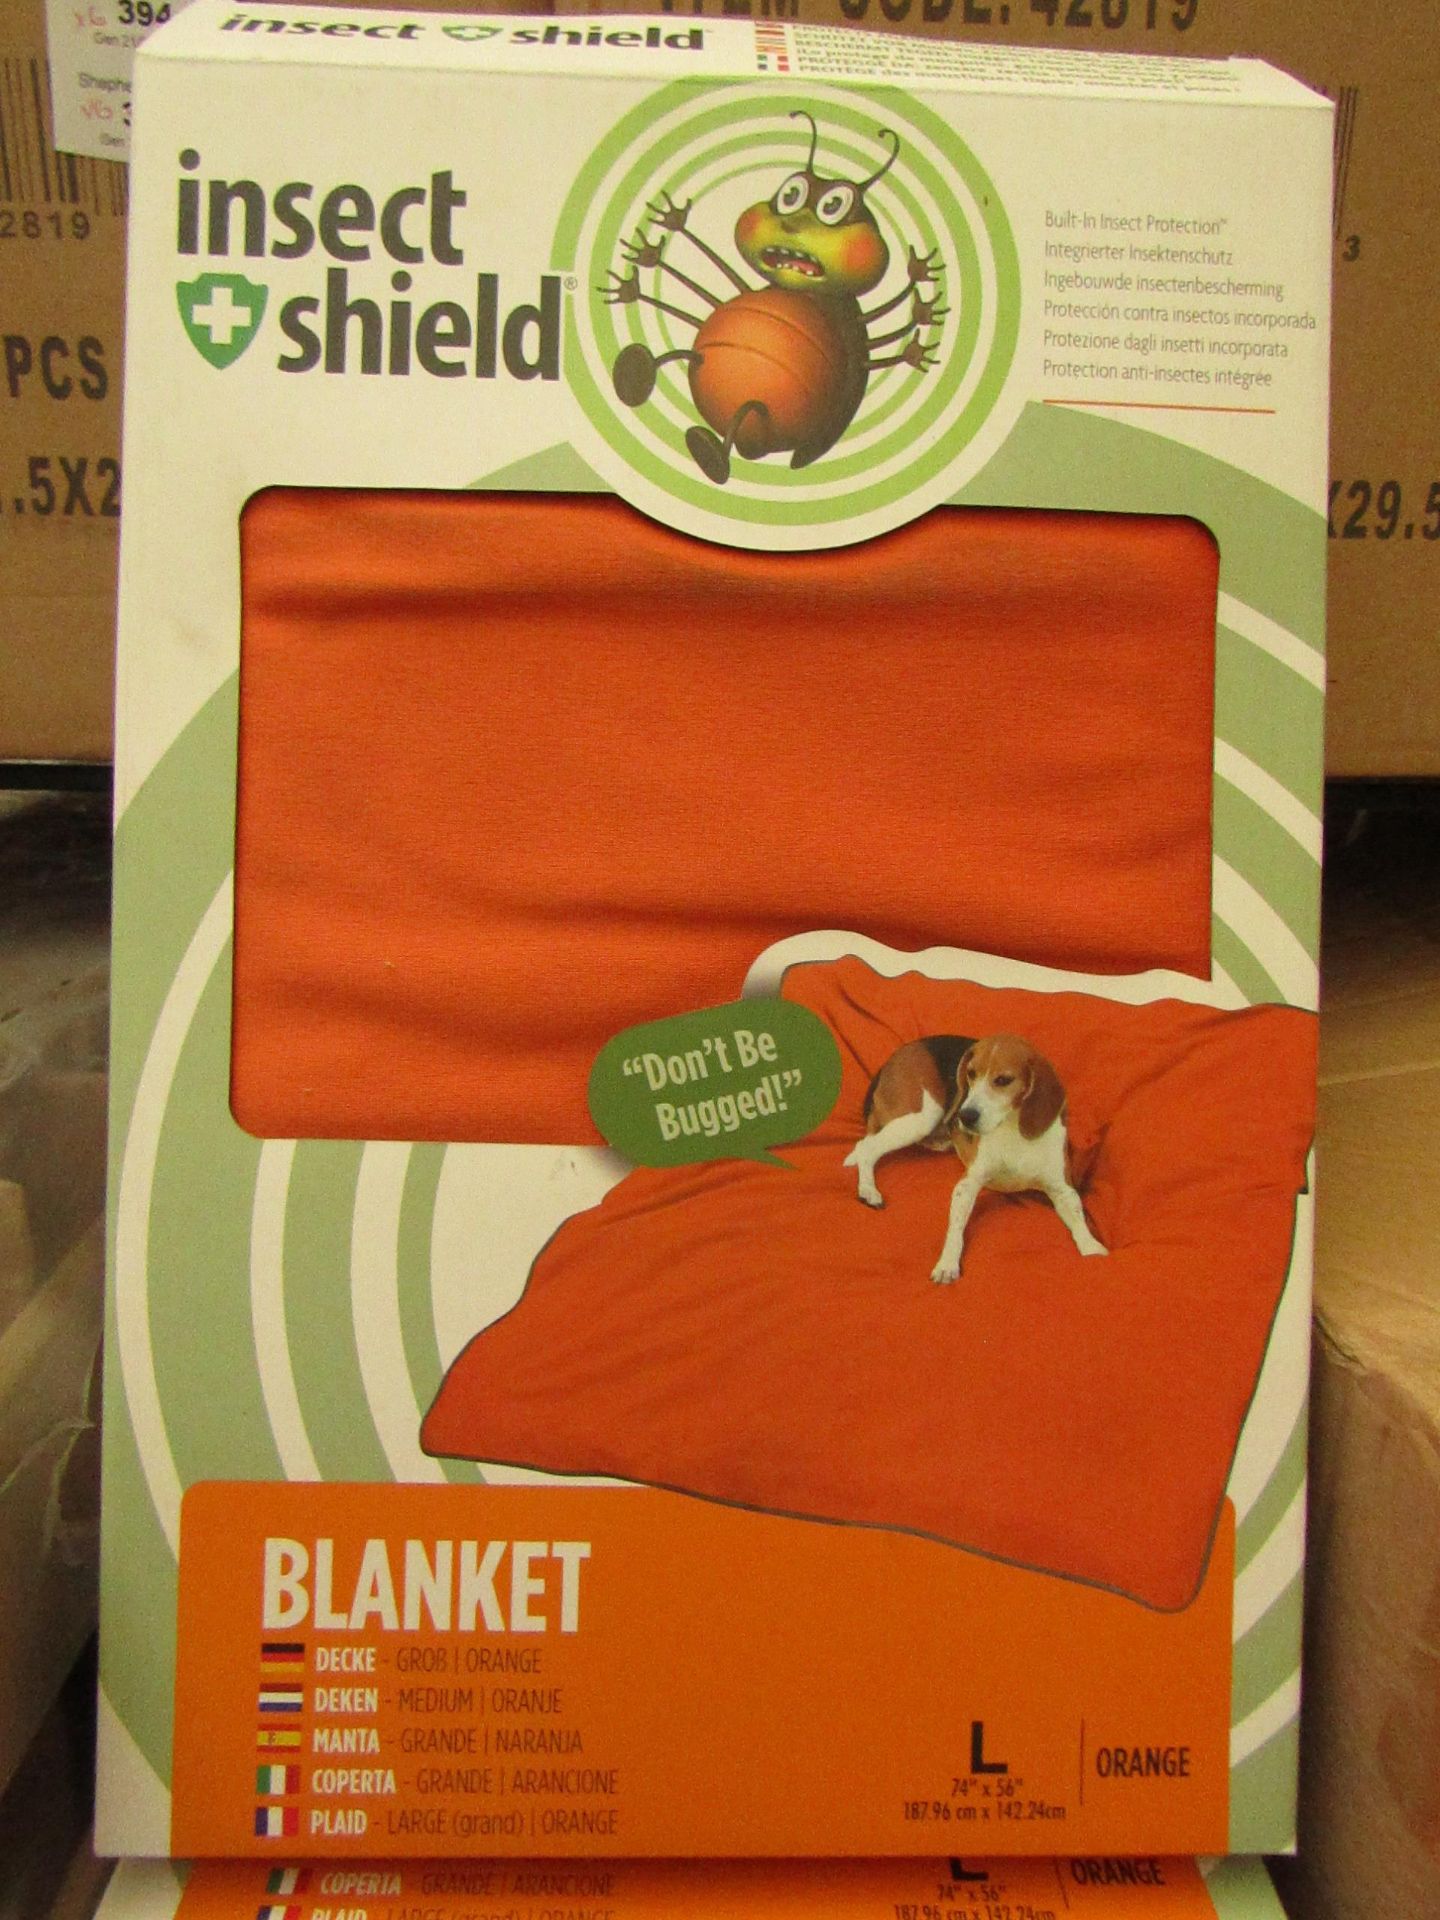 1 x Insect Shield Outdoor Protection Blanket size L 74" x 56" RRP £29.99 new & packaged